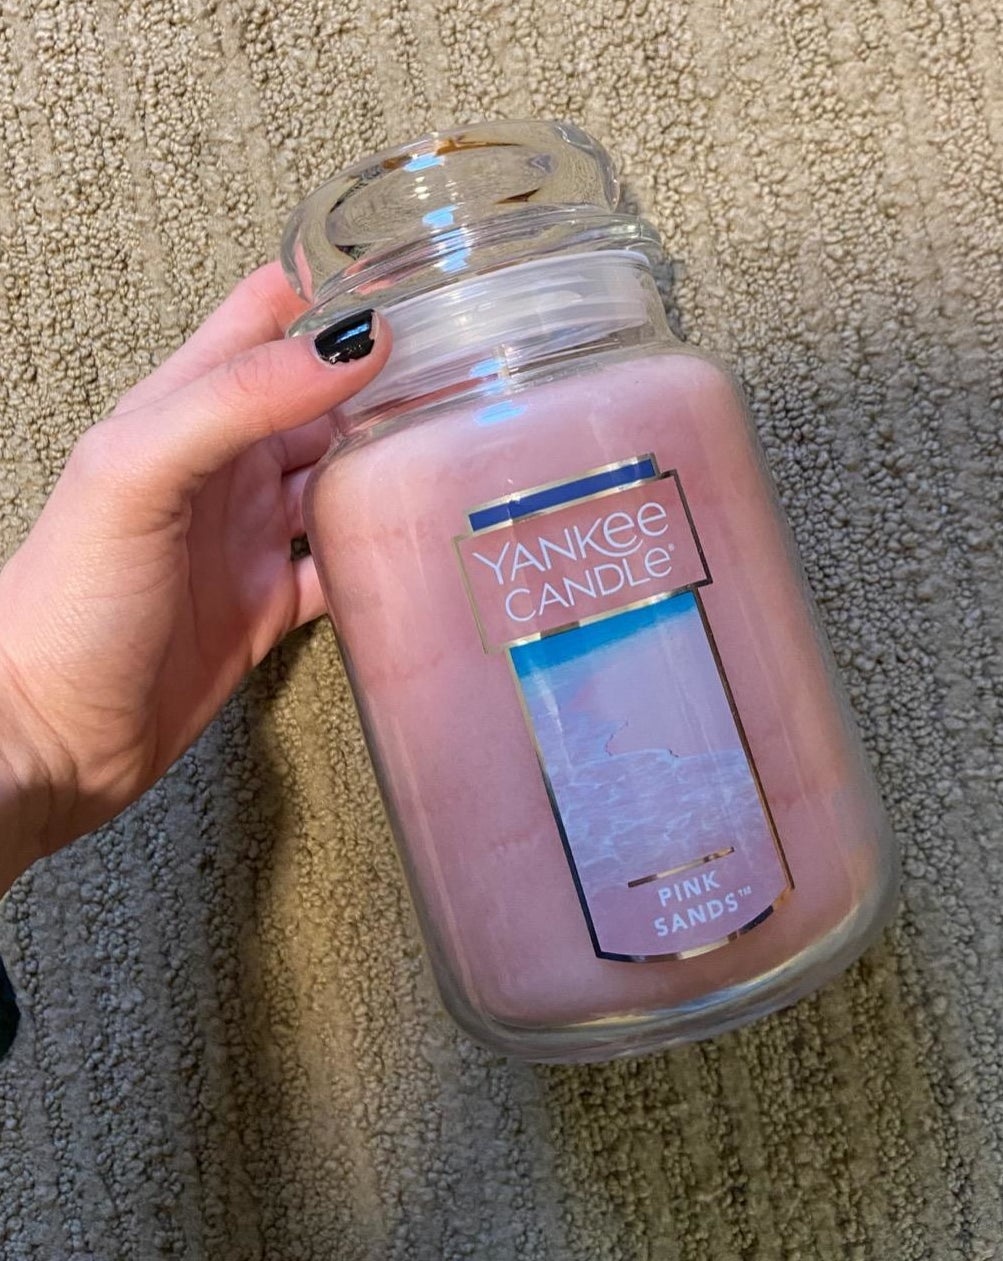 person holding the pink sands yankee candle